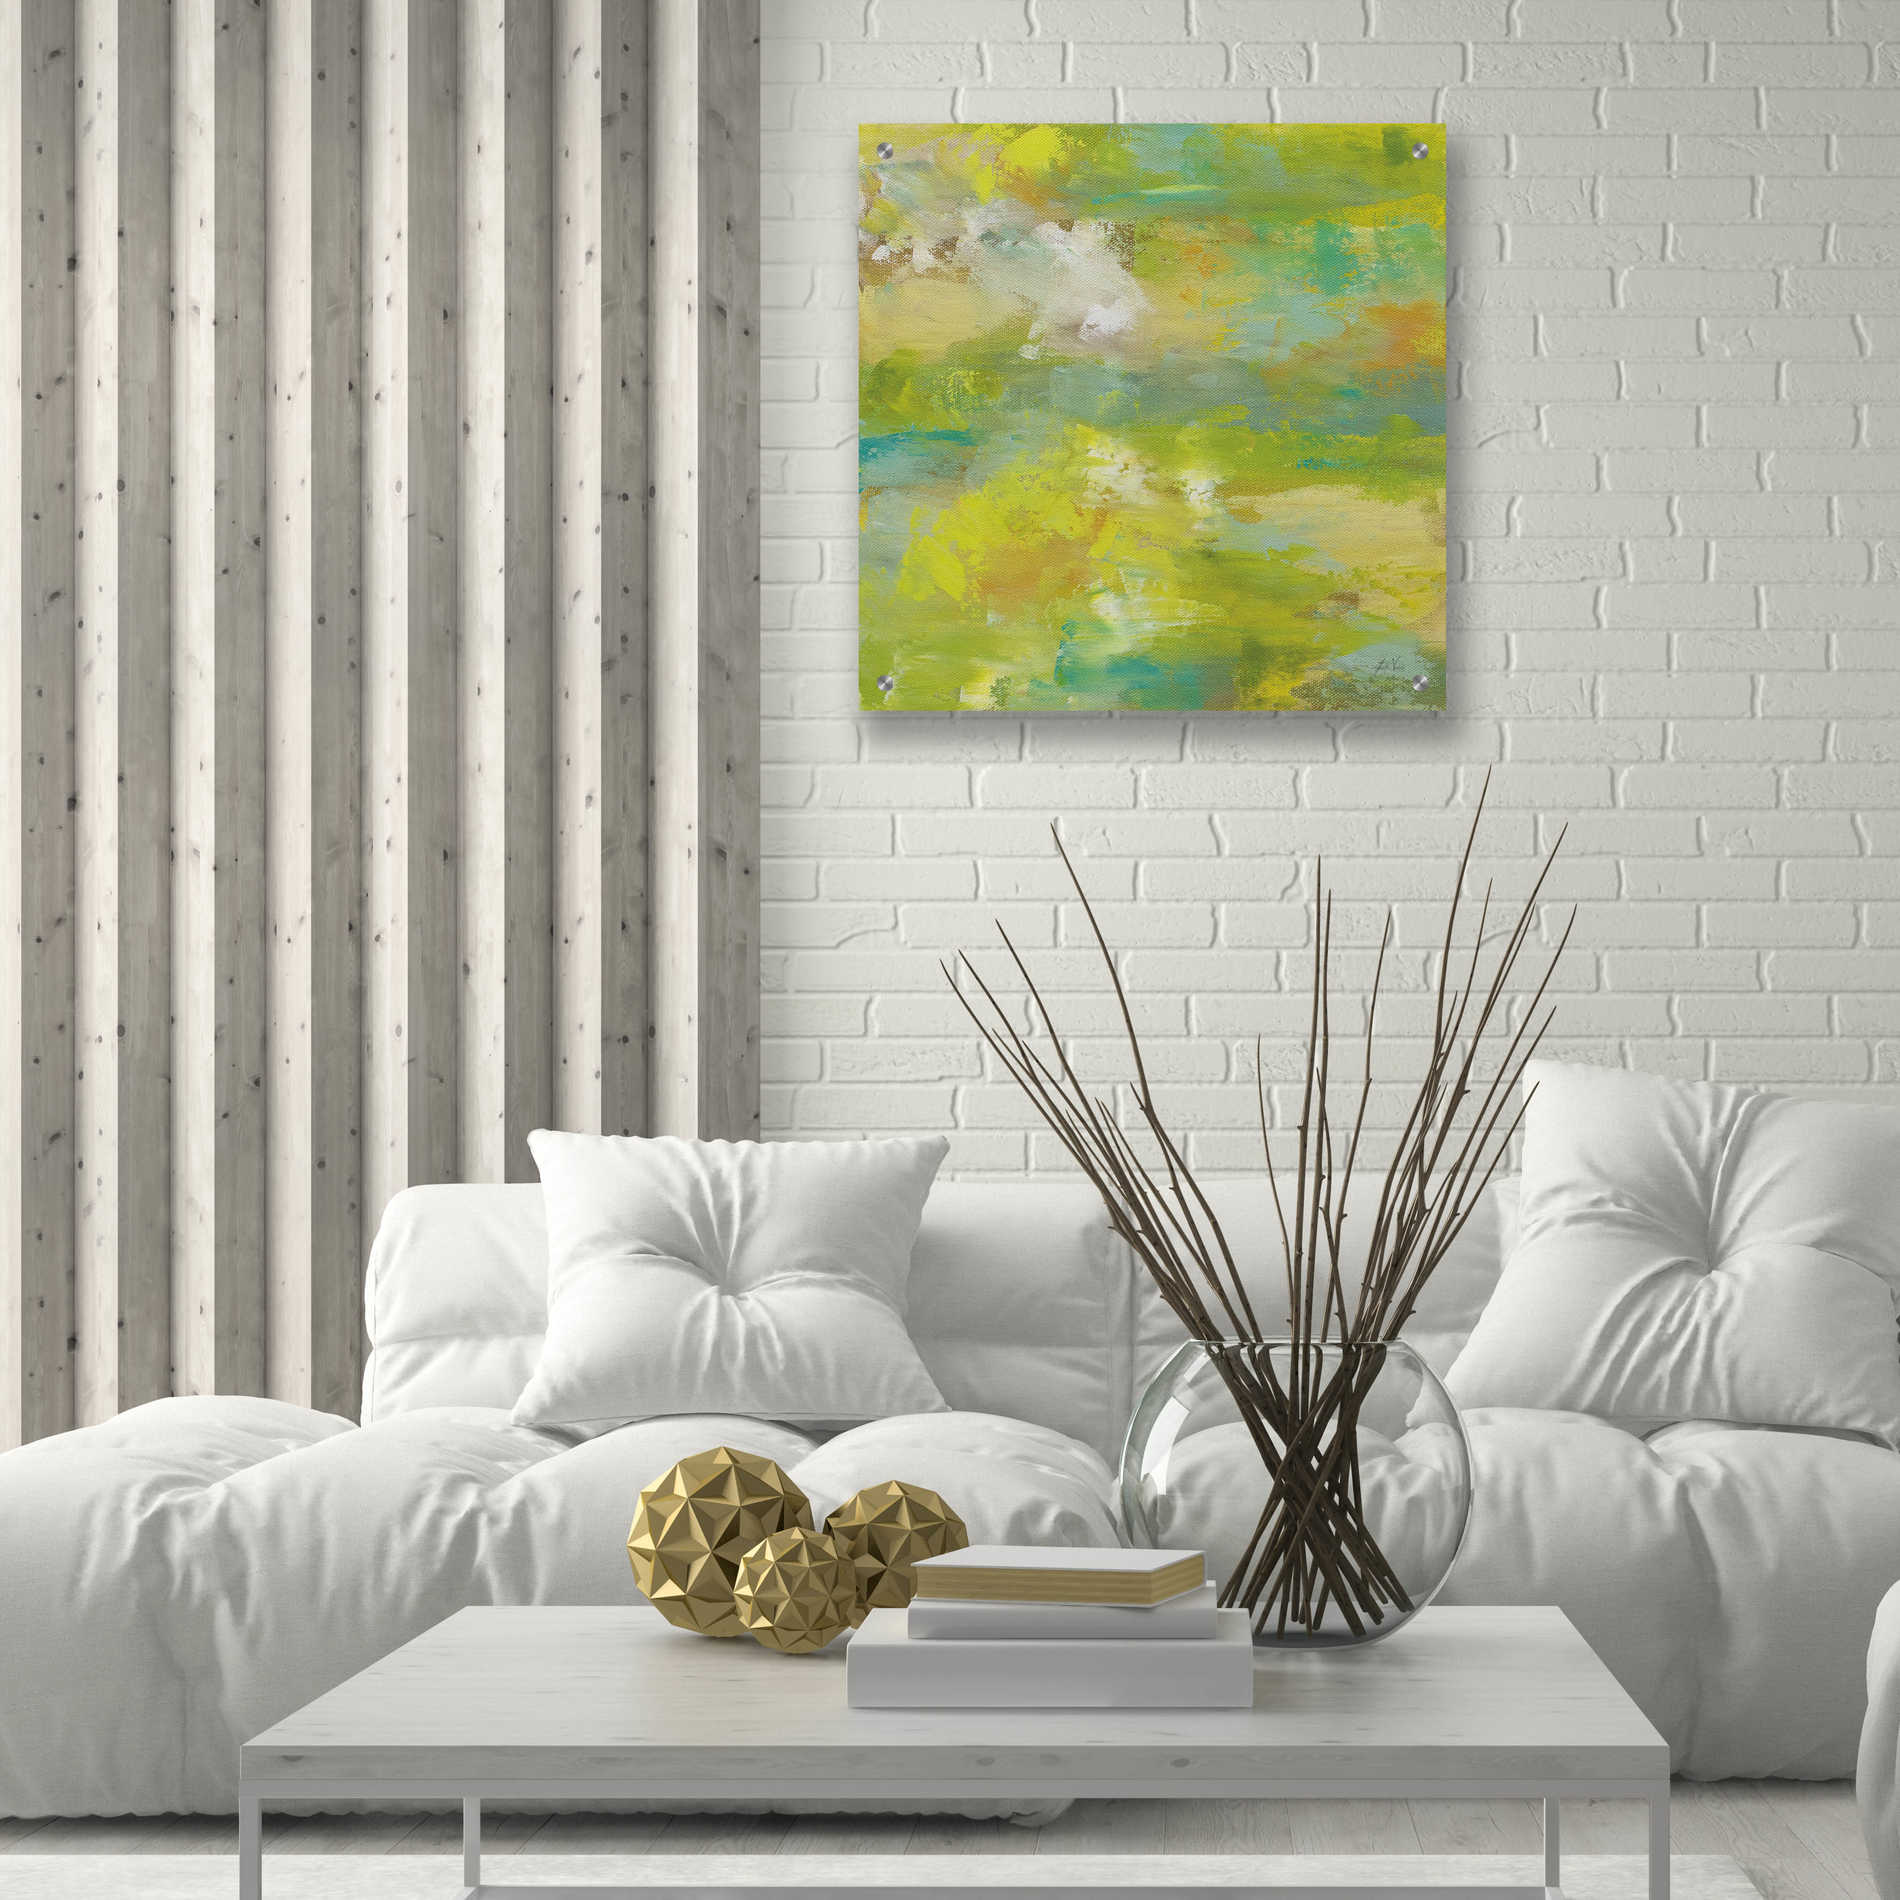 Epic Art 'Bliss' by Jeanette Vertentes, Acrylic Glass Wall Art,24x24